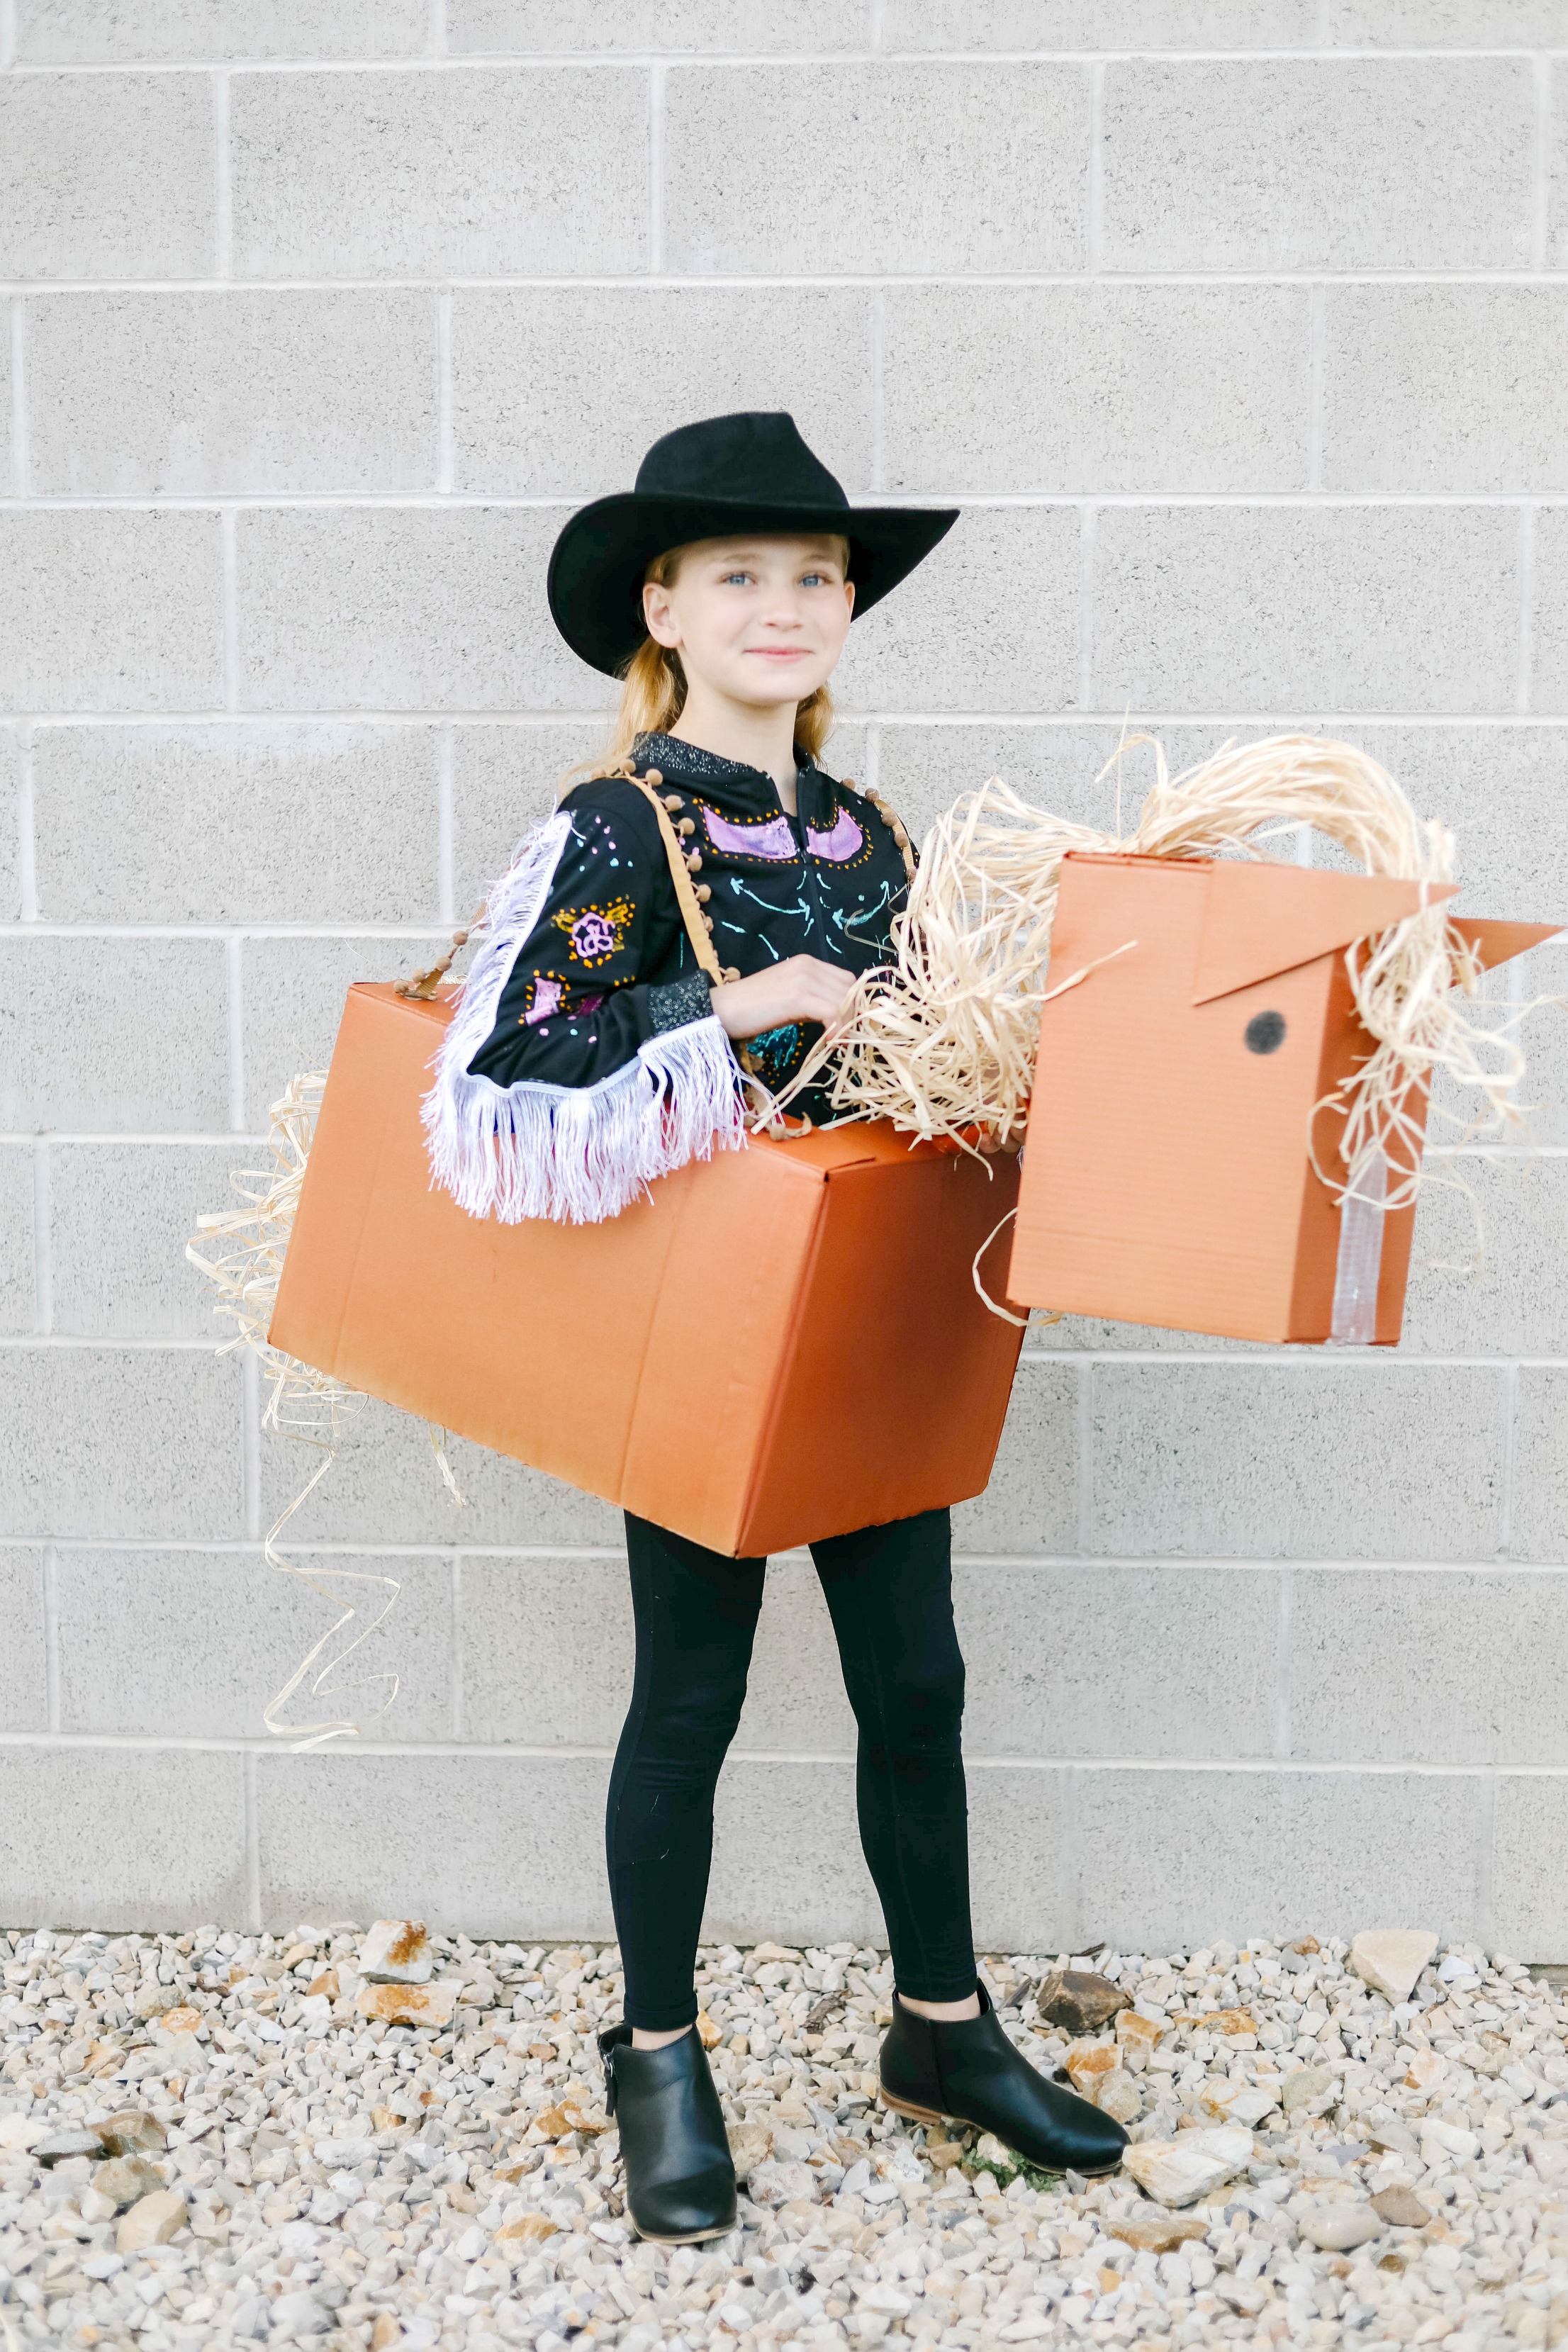 ﻿"Old Town Road" Western Boxtume Costume DIY. Turn a catchy western song into an easy Halloween costume with Amazon Prime smile boxes and some creativity! 